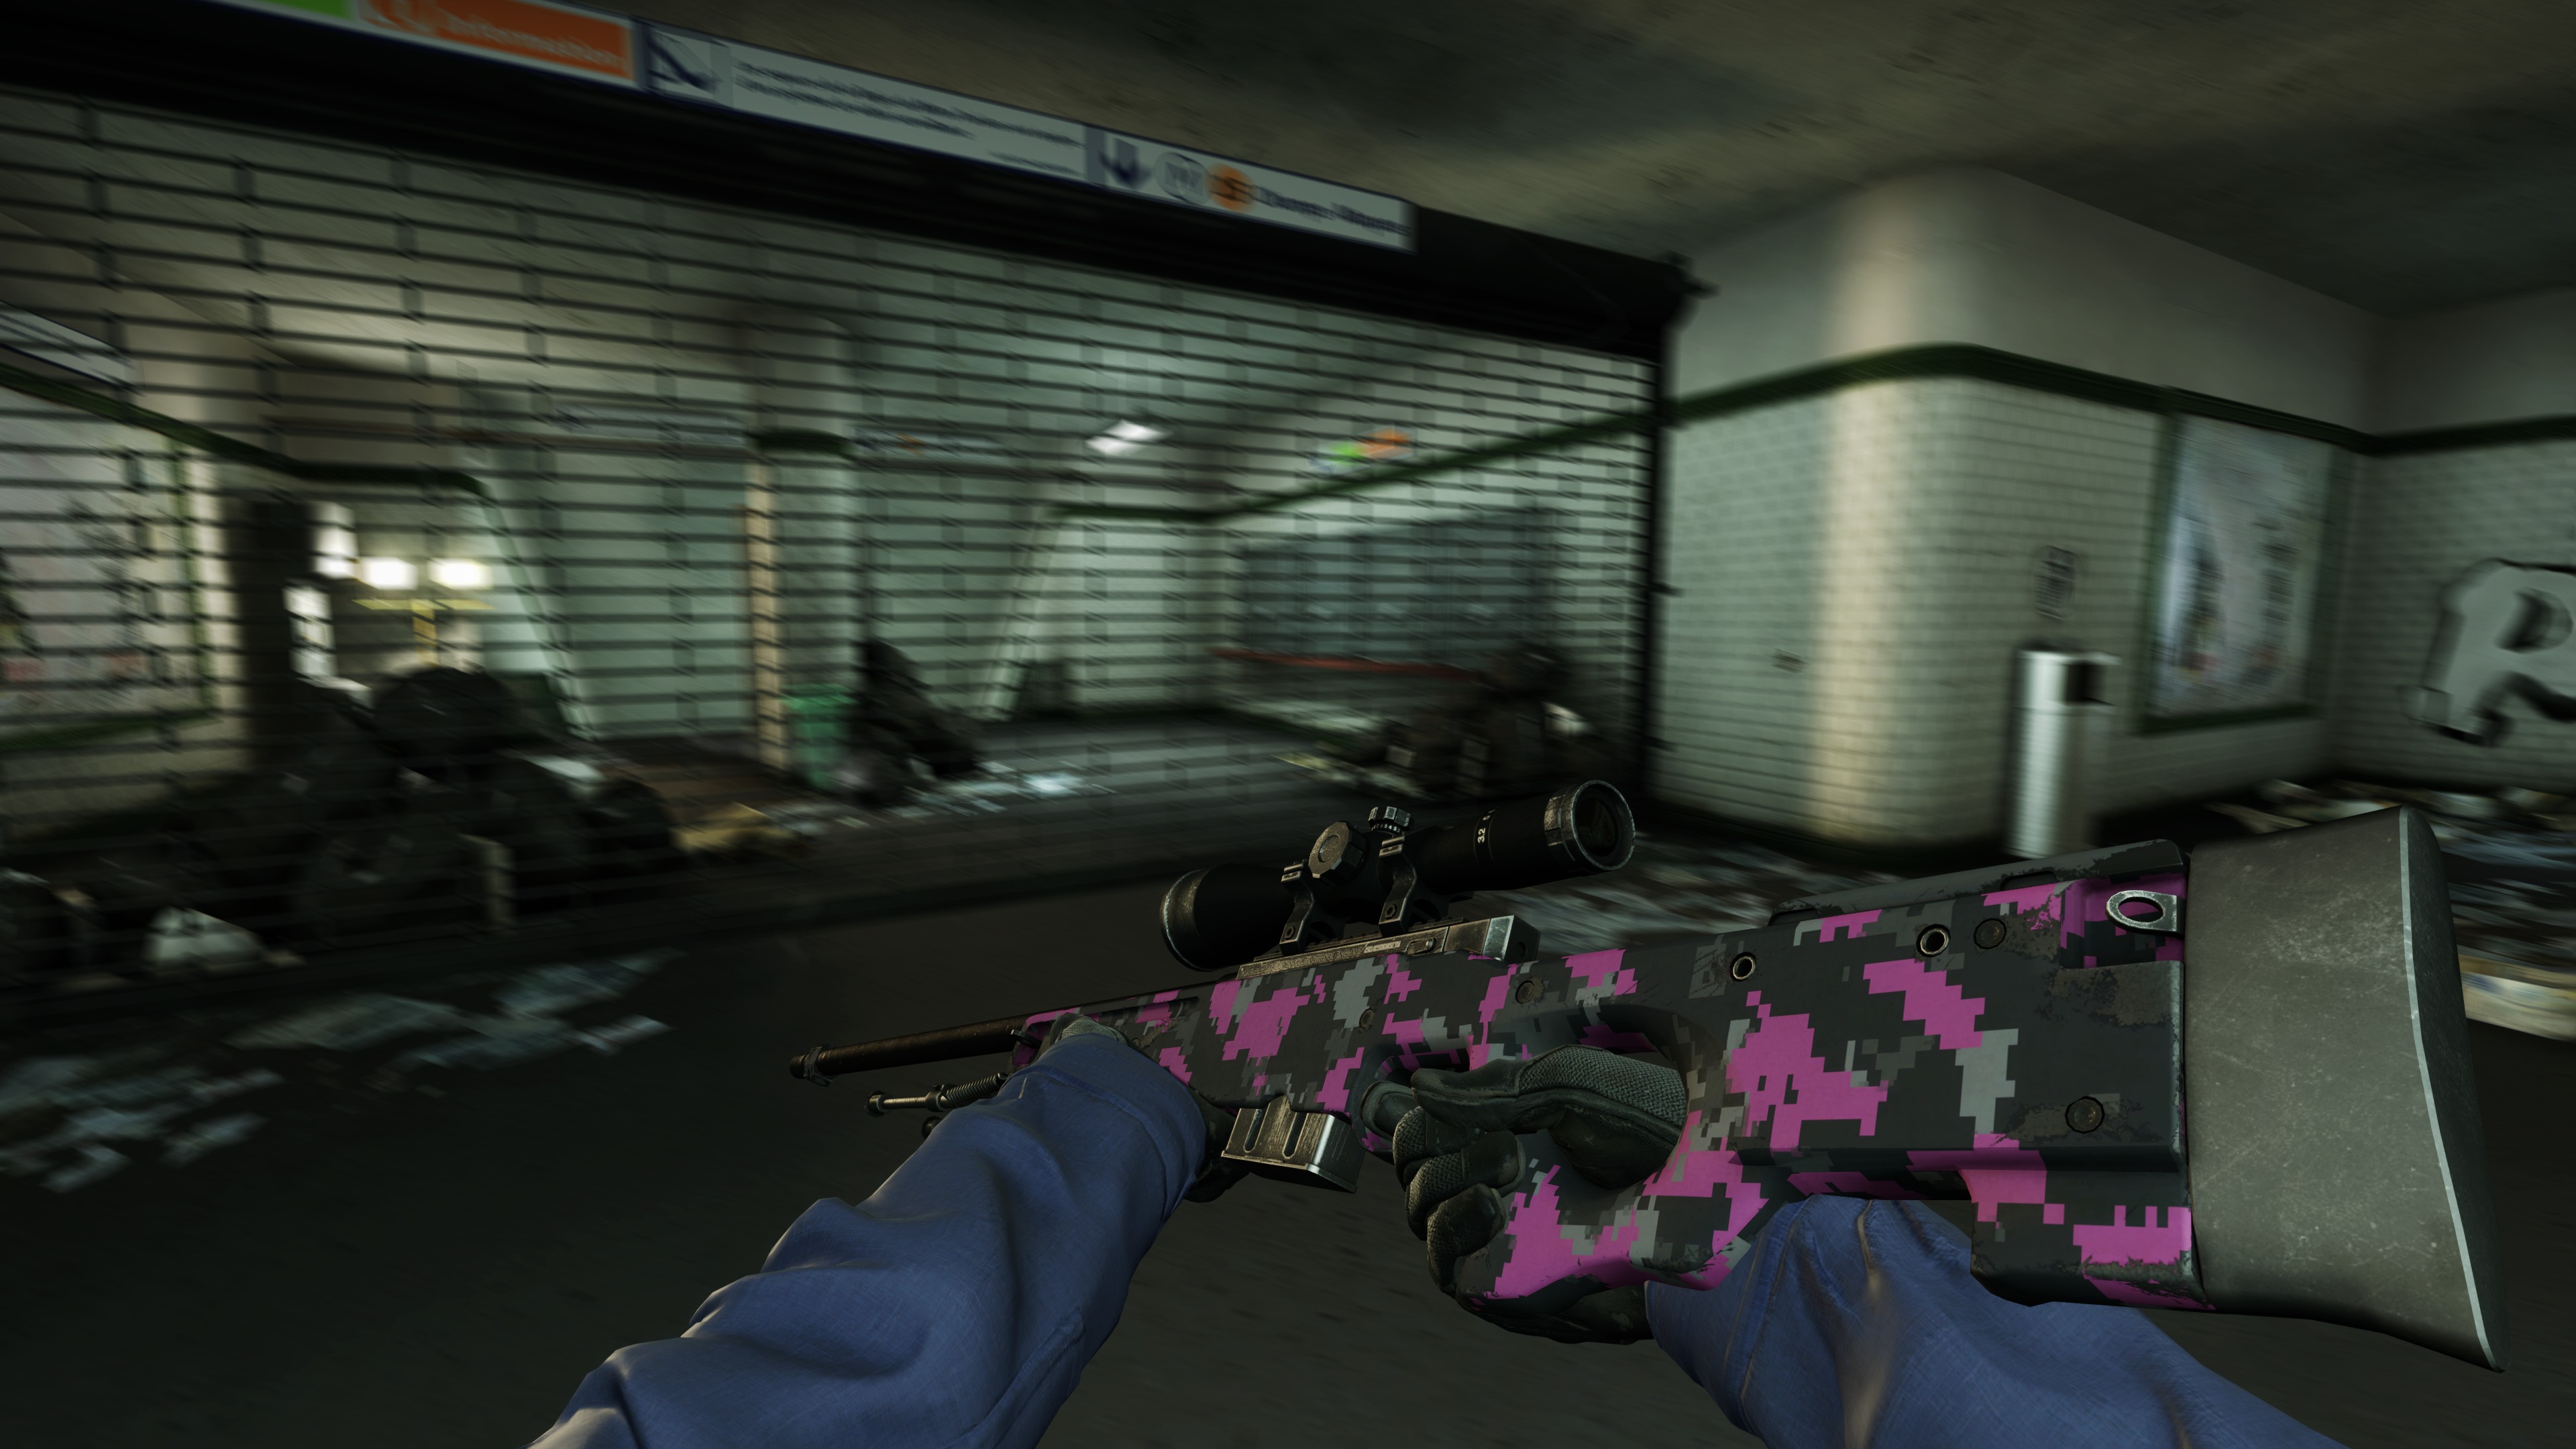 Counter Strike: Global Offensive, Counter Strike, Pink DDPAT, Accuracy International AWP, Death Wallpaper